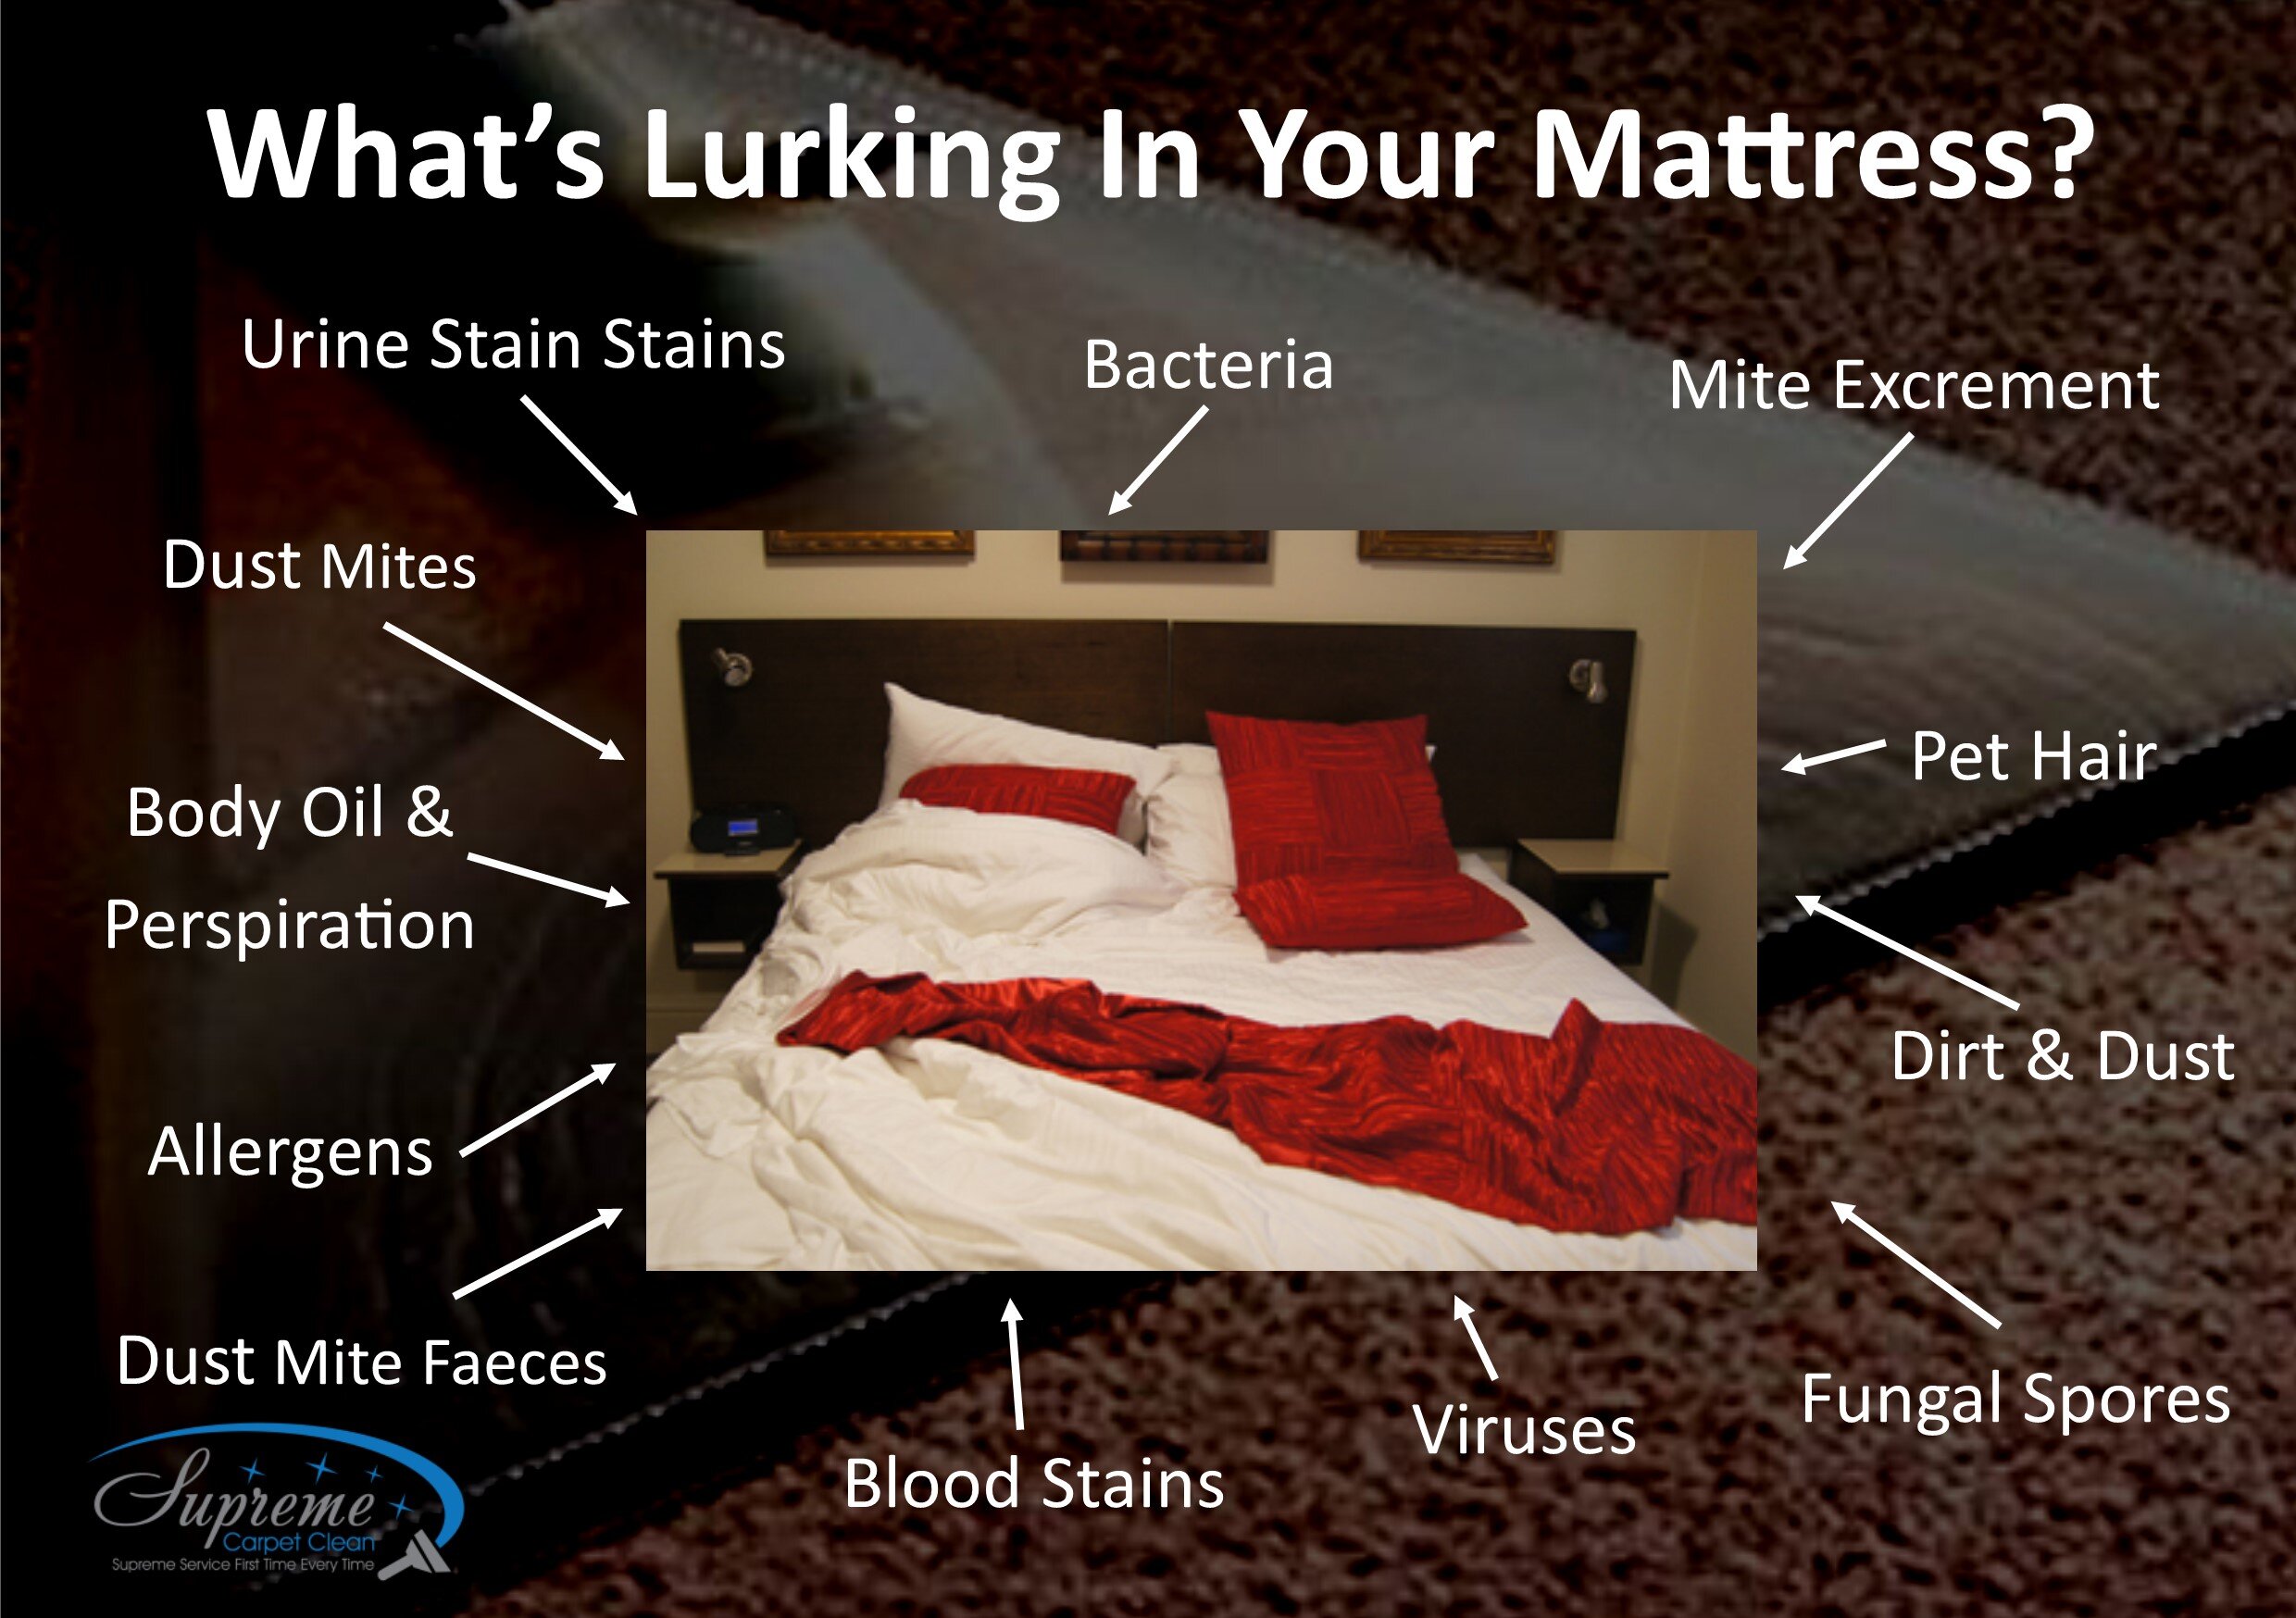 whats lurking in your mattress.jpg